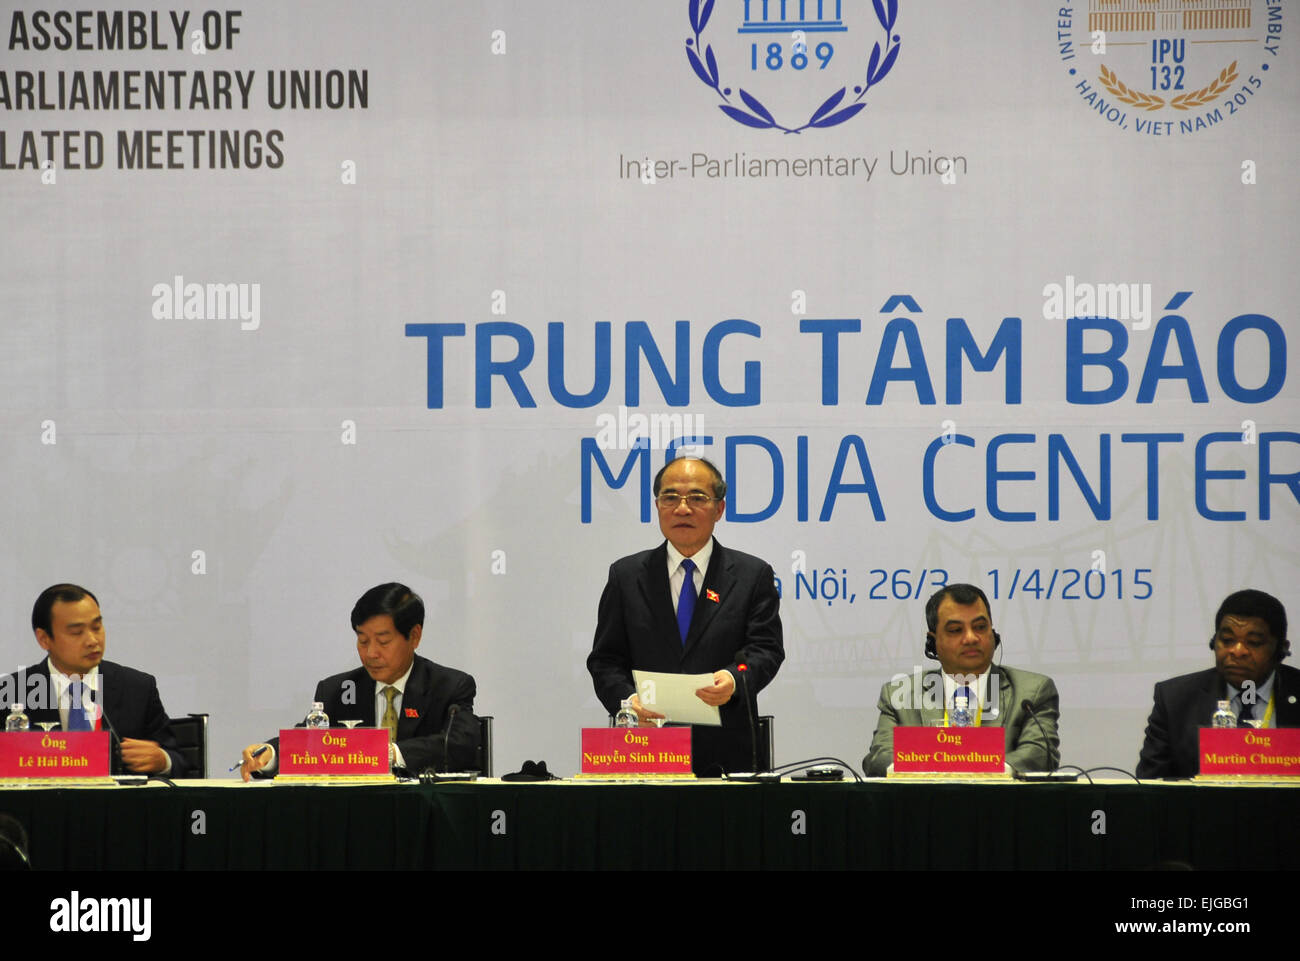 Hanoi, Vietnam. 26th Mar, 2015. Nguyen Sinh Hung (C), Vietnam's National Assembly (NA) chairman, speaks during a press conference of the 132nd Assembly of the Inter-Parliamentary Union (IPU) in Hanoi, Vietnam, on March 26, 2015. Vietnam is ready for the 132nd Assembly of IPU and will try its best to ensure success of the important diplomatic event, said Nguyen Sinh Hung, Vietnam's NA chairman, here Thursday. © Zhang Jianhua/Xinhua/Alamy Live News Stock Photo